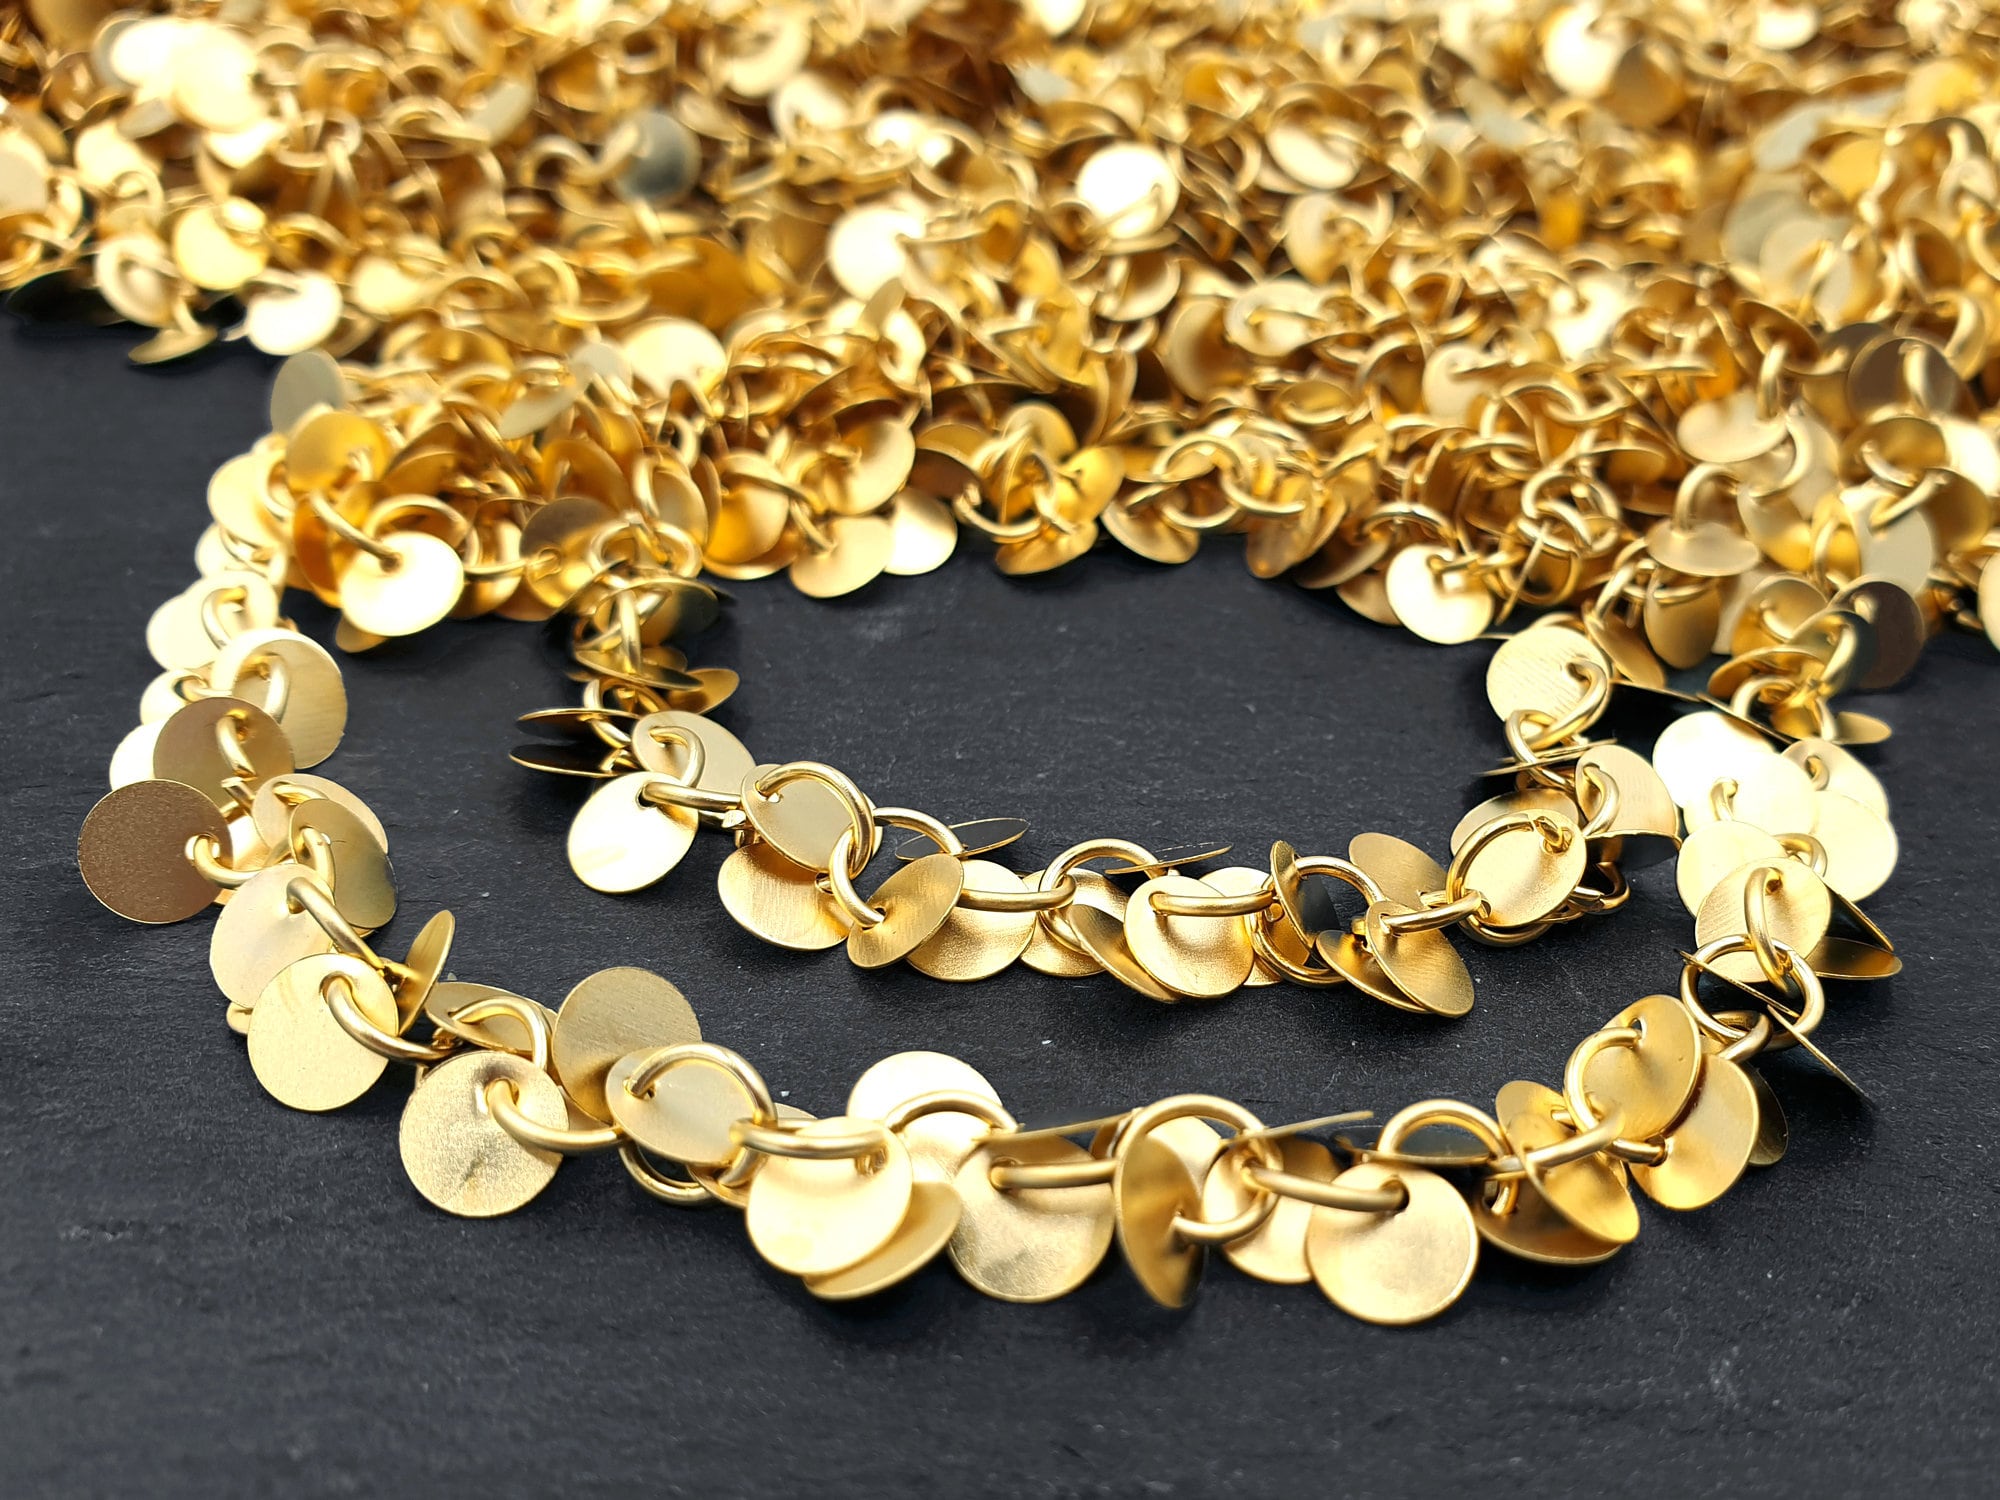 Gold Coin Chain, Cluster Disc Chain, Jewelry Chain, Ankle Bracelet Chain, Necklace Chain, 22k Matte Gold Plated, 1 Meter = 3.3 feet